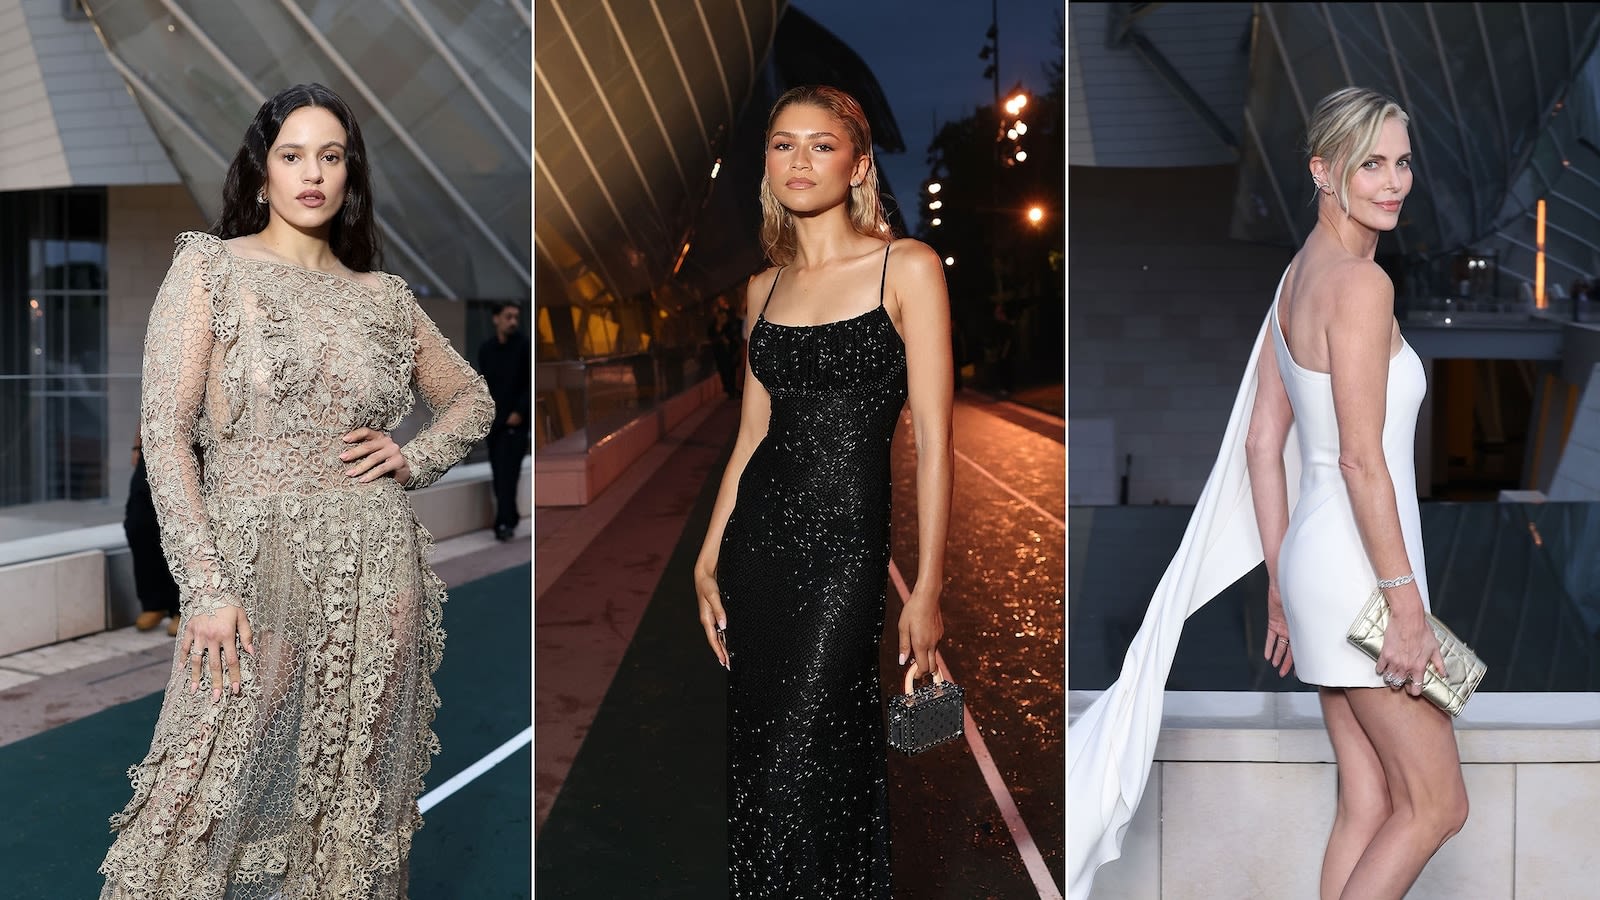 Zendaya, Charlize Theron and more step out for Prelude to the Olympics event in Paris